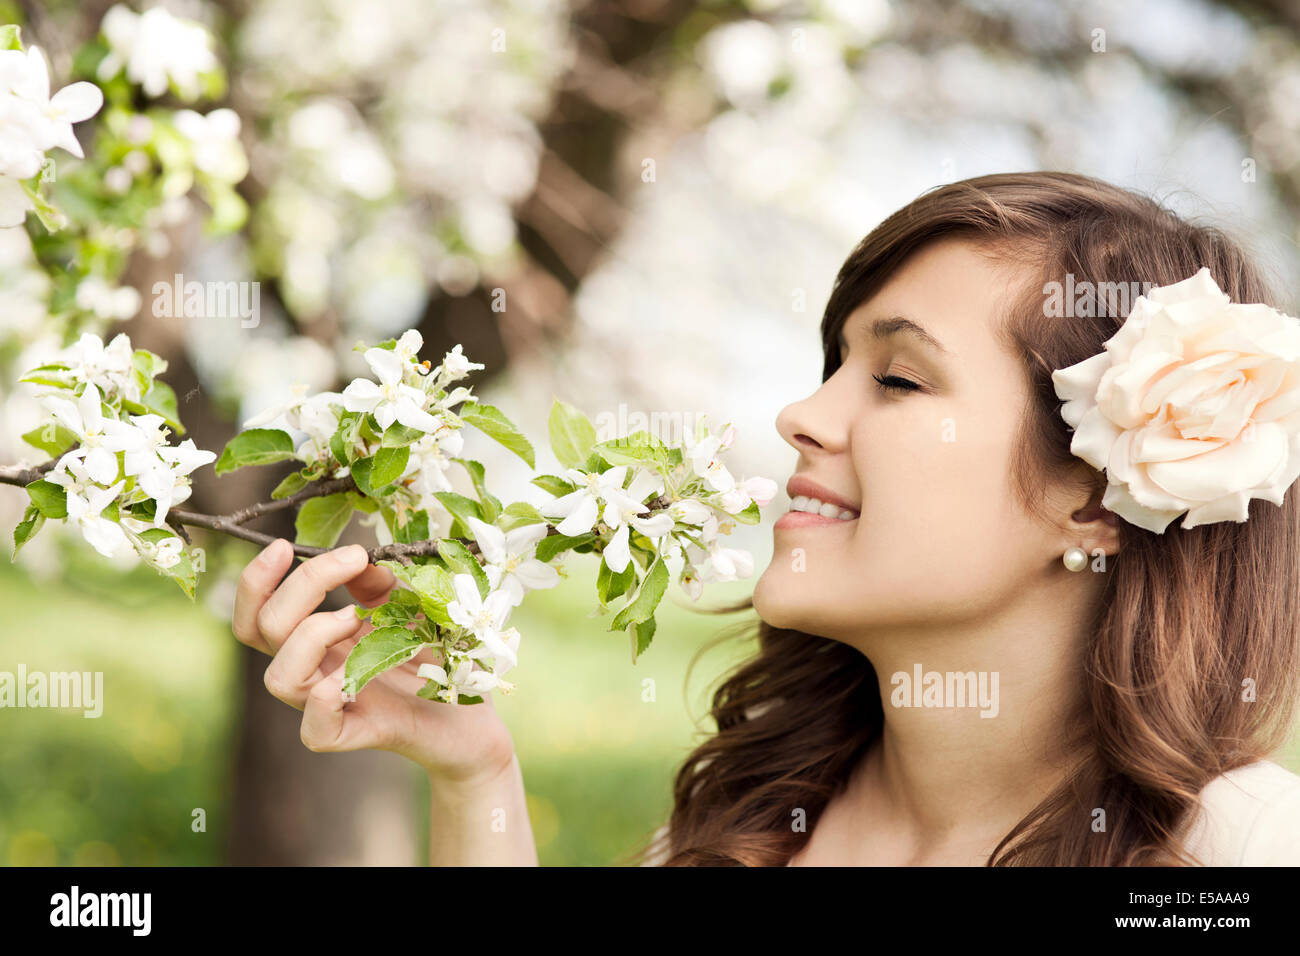 Happy young woman enjoying the fragrance of flowers. Debica, Poland. Stock Photo